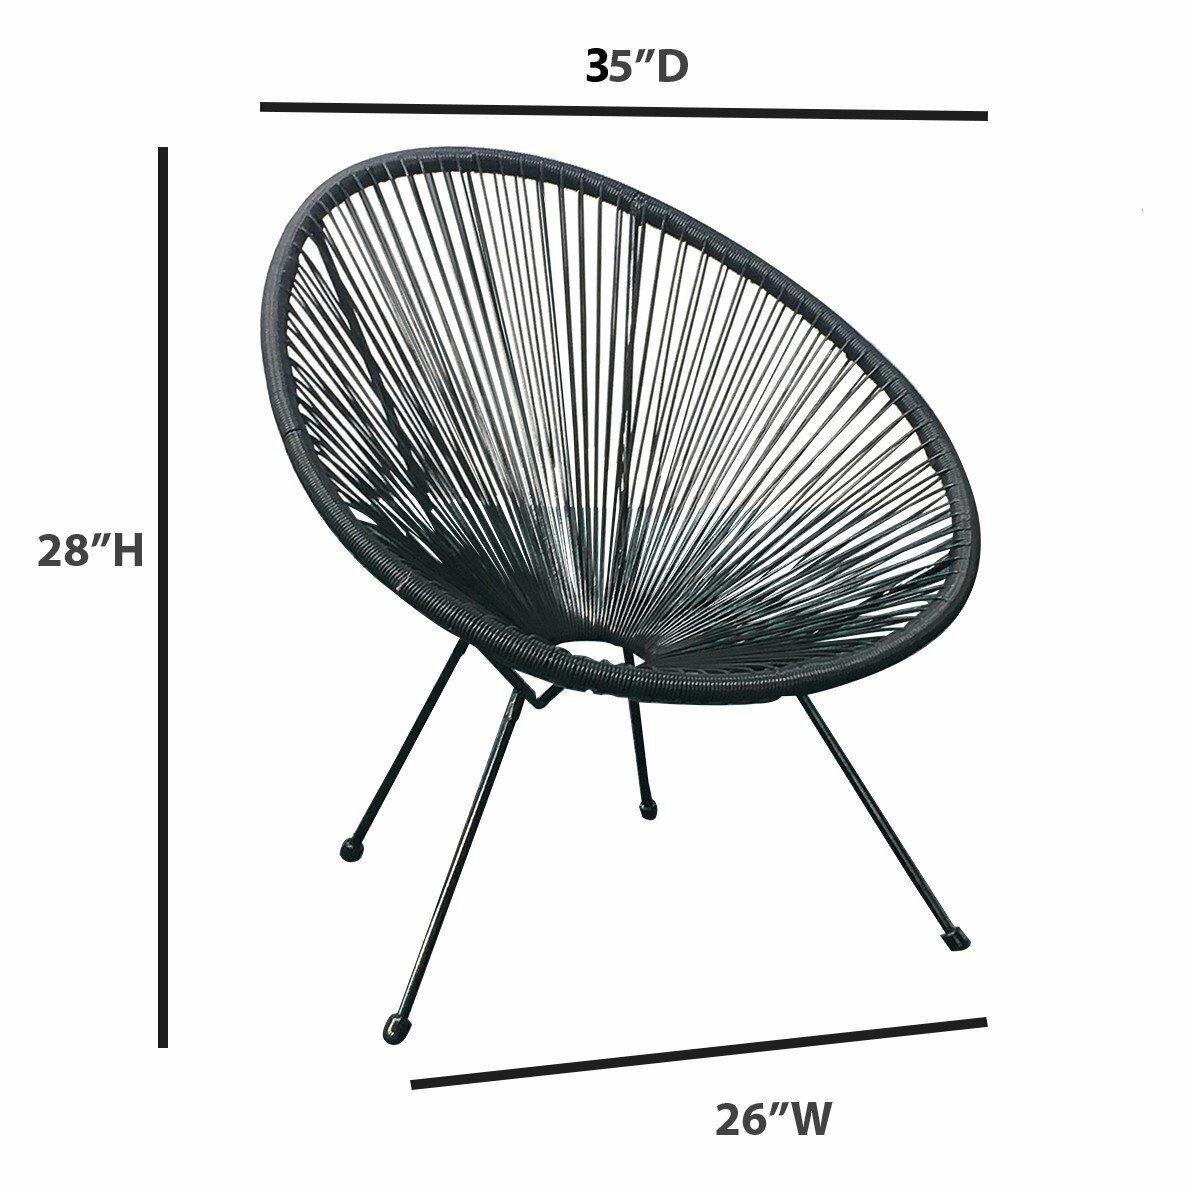 Gearhart Patio Chair, This hip, retro, pear-shaped chair is just the right amount of casual when it''s placed on the patio or deck, This weaving technology lounge chair brings ergonomic comf - image 3 of 4